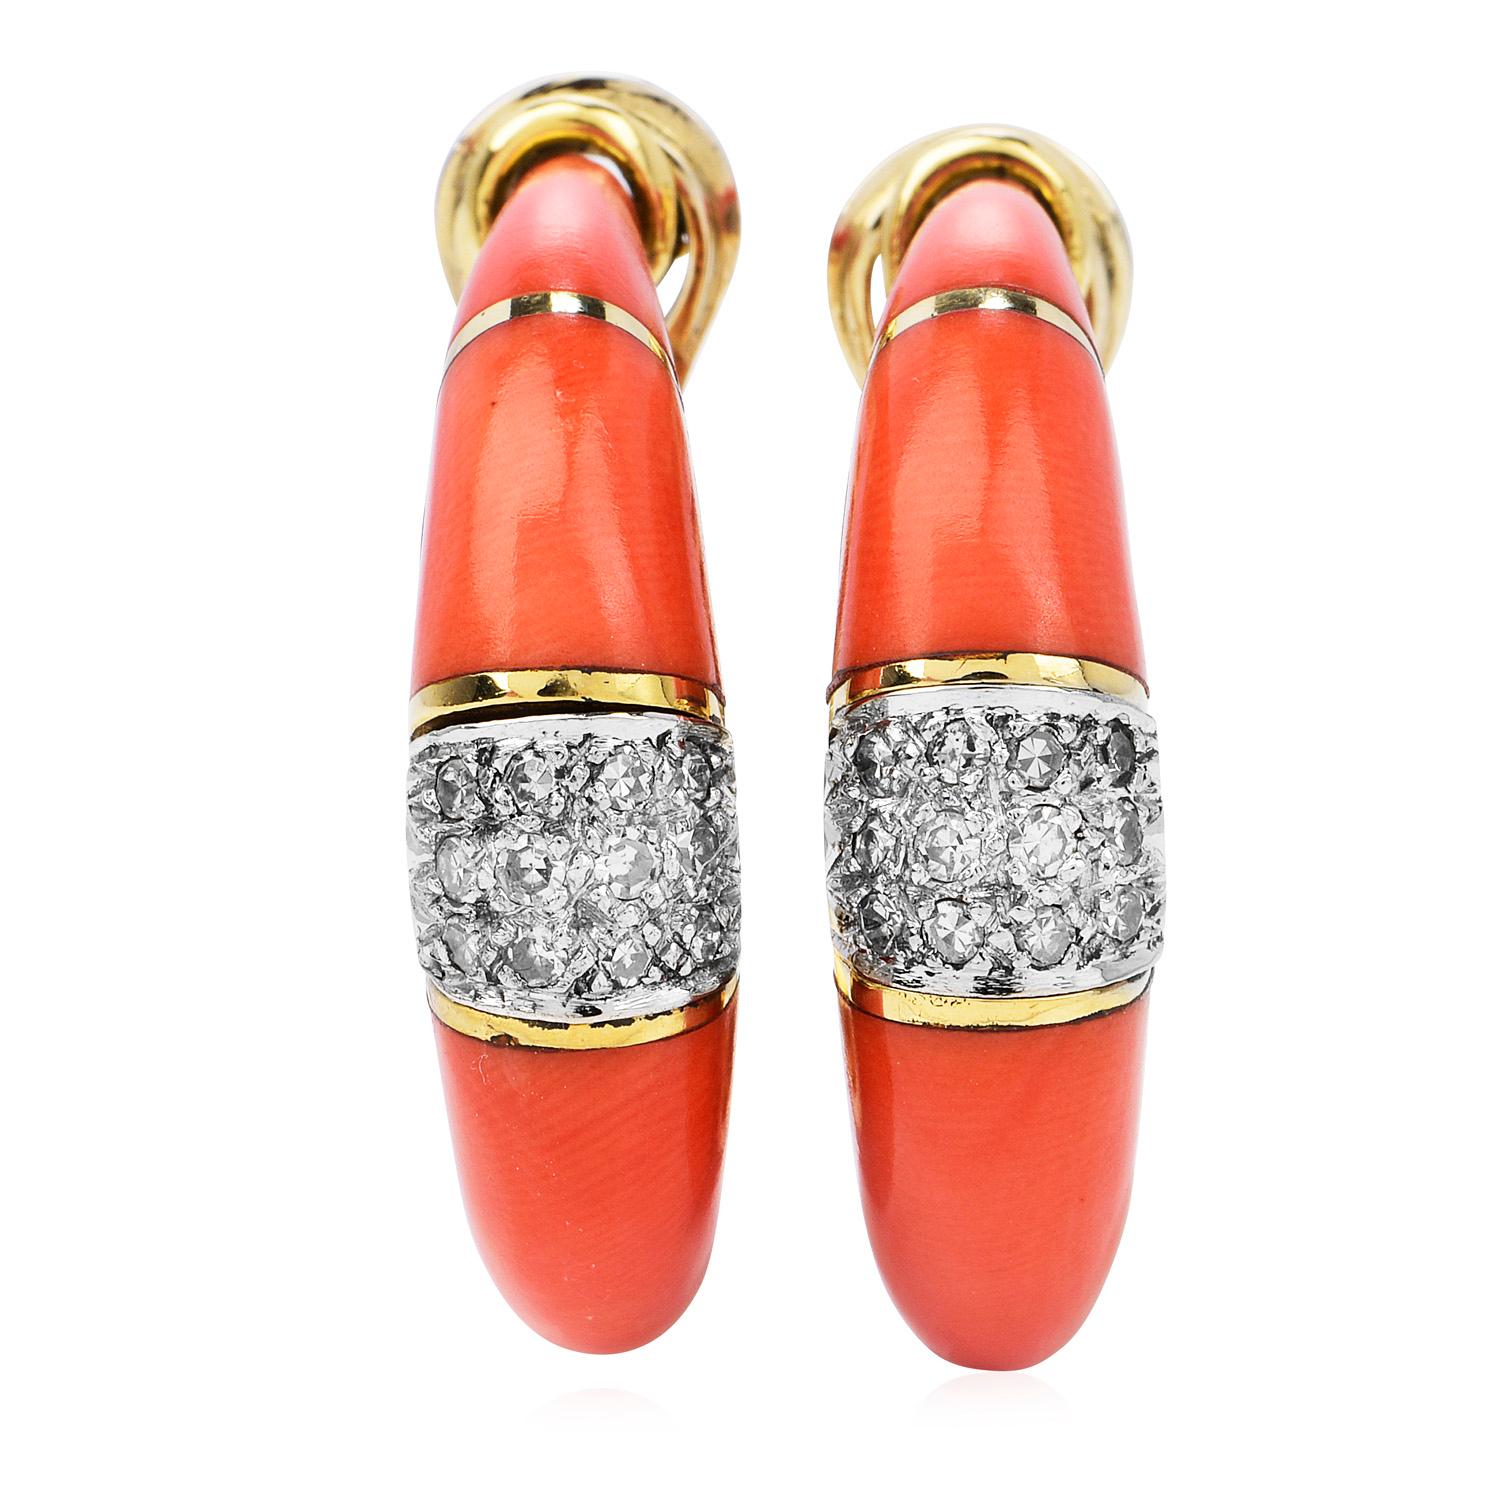 Vintage Diamond Coral 18K Gold Elegant Clip On Earrings

Bring Summer to your life with this gorgeous Vintage Diamond Coral 18K Gold Elegant Clip On Earrings for NON pierced ears weighing 21.0 grams

Exquisitely crafted in solid 18K yellow and white